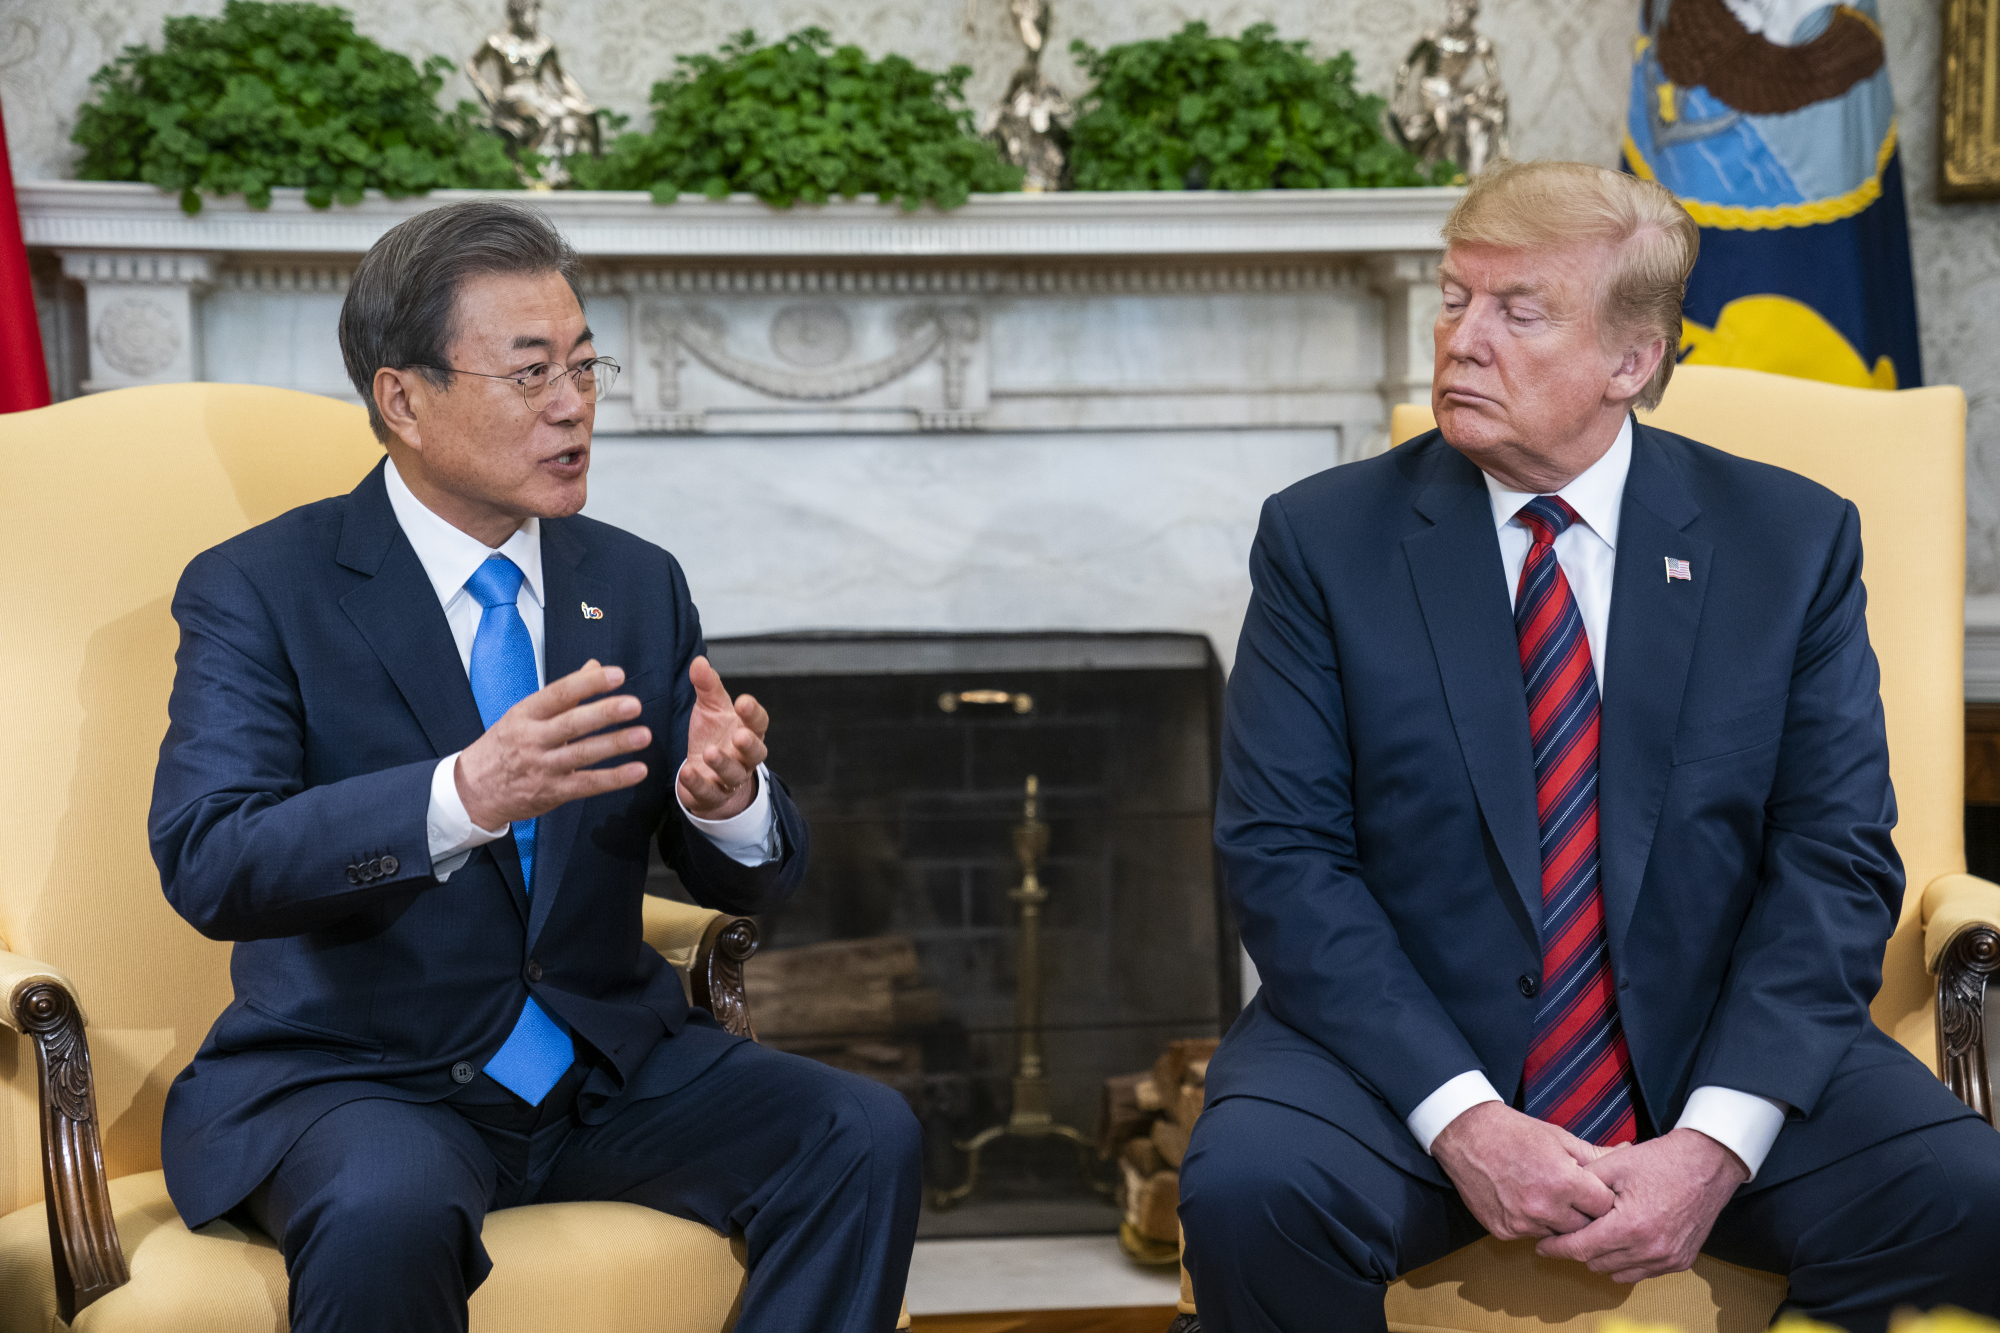 South Korean President Moon Jae-in speaks with U.S. President Donald Trump in the Oval Office of the White House on Thursday. | BLOOMBERG